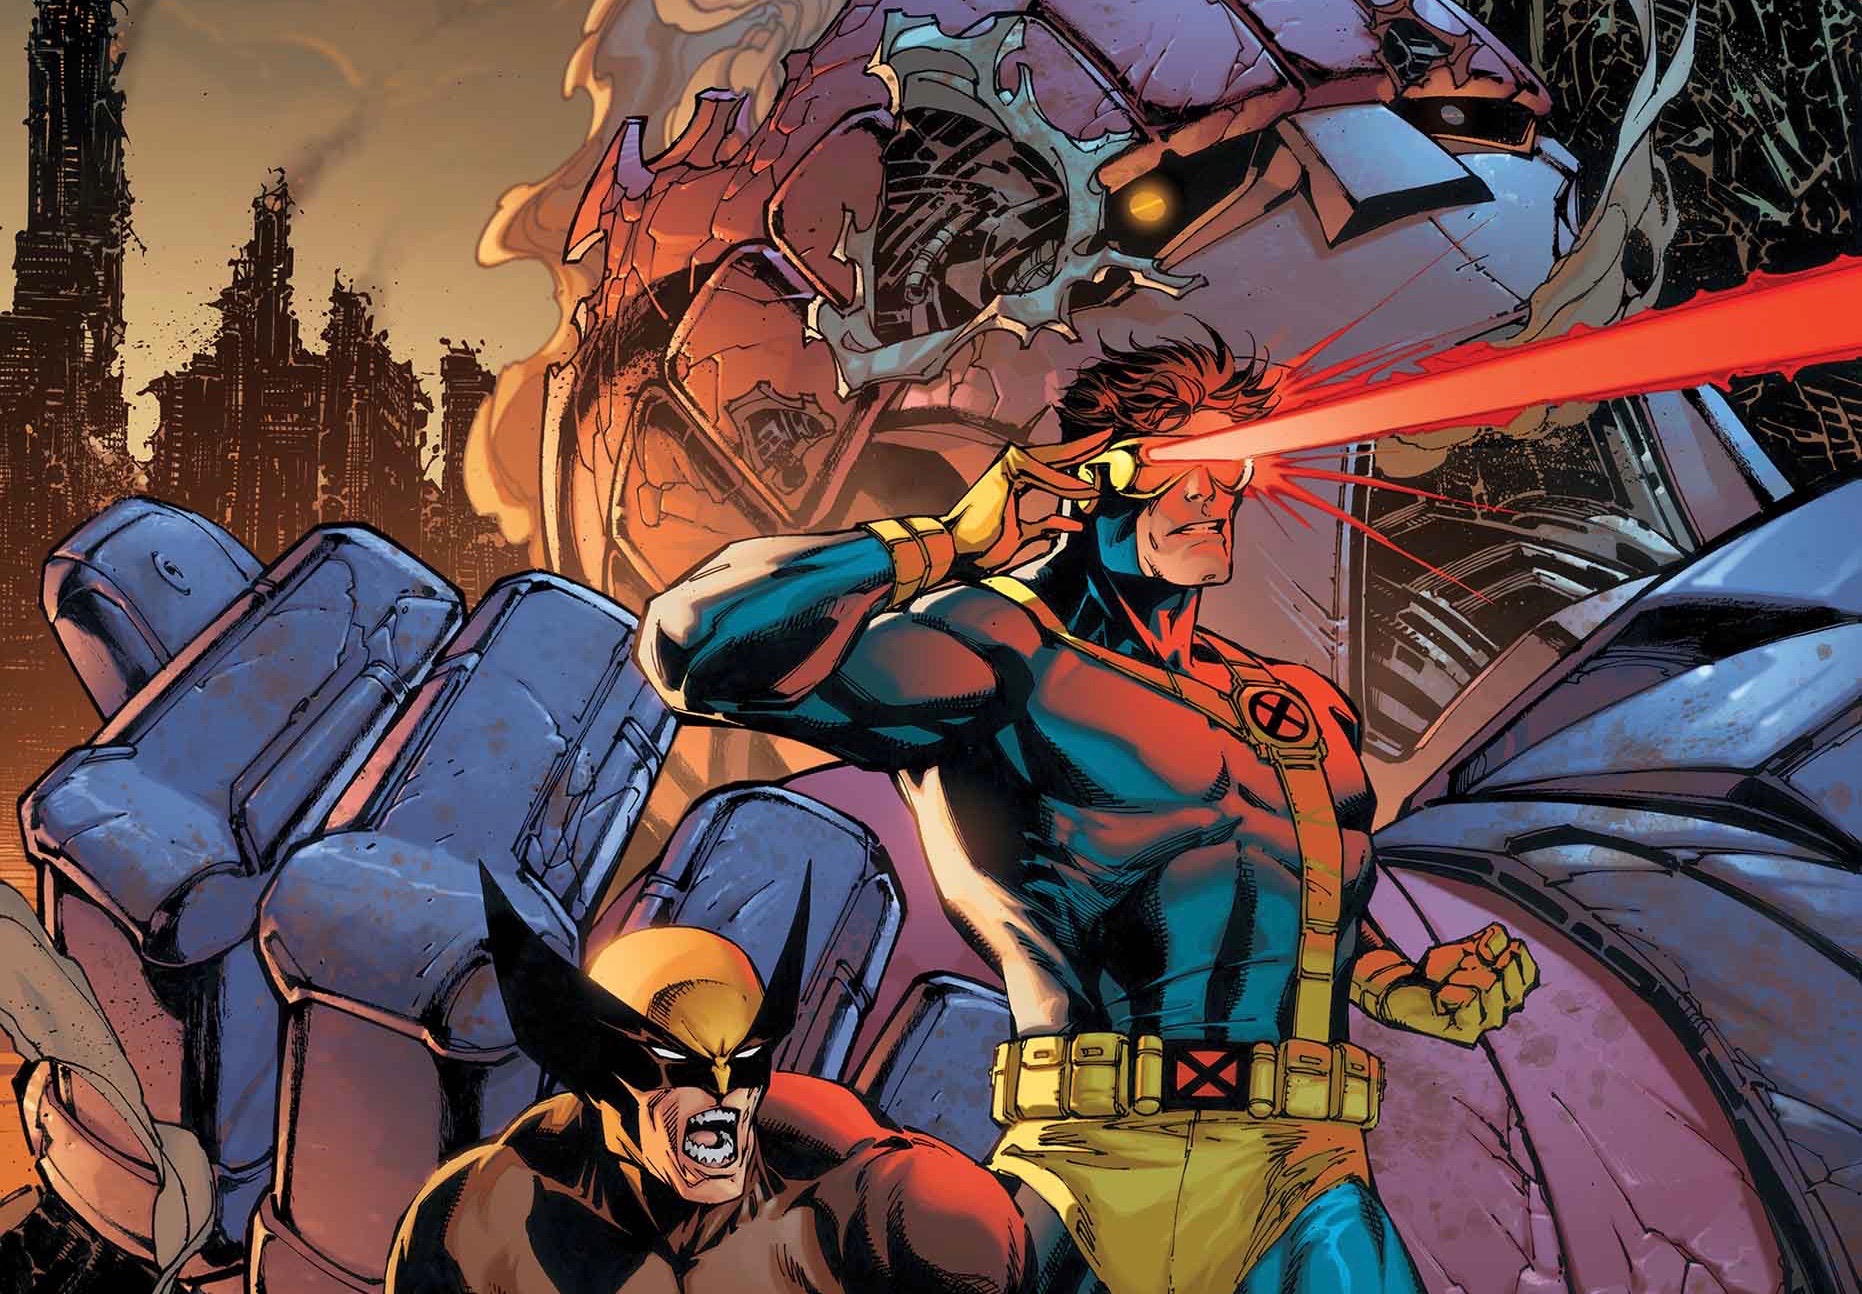 Cyclops returns, Wolverine goes cosmic and the Age of X-Man begins in Marvel's February 2019 X-Men solicitations